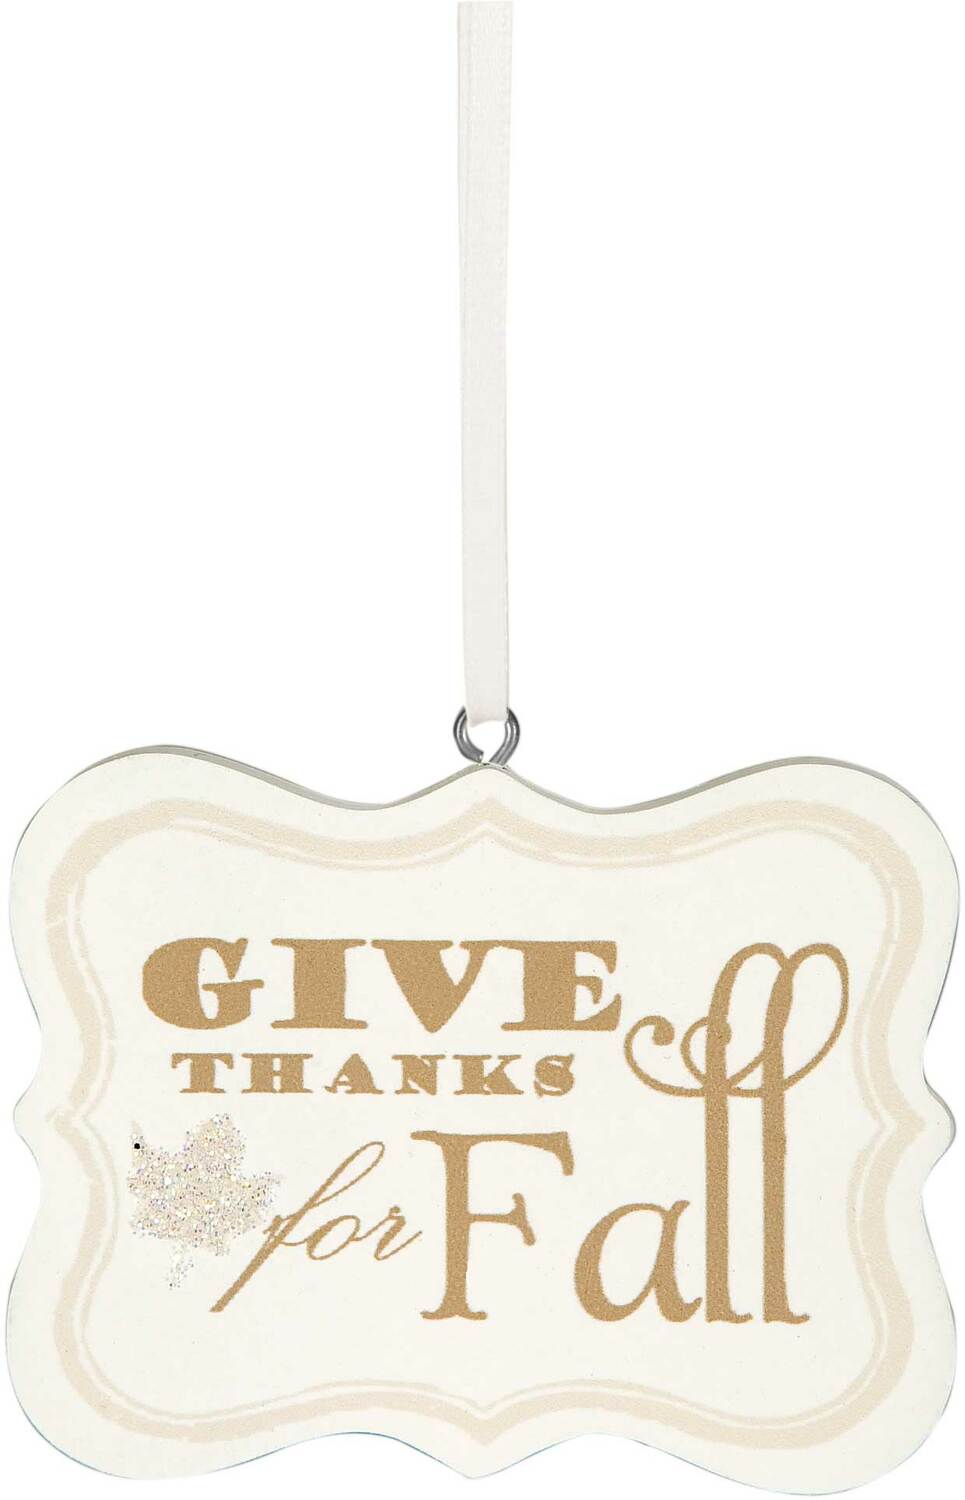 Give Thanks for Fall by Signs of Happiness - Give Thanks for Fall - 2.75" x 2.25" Hanging Plaque